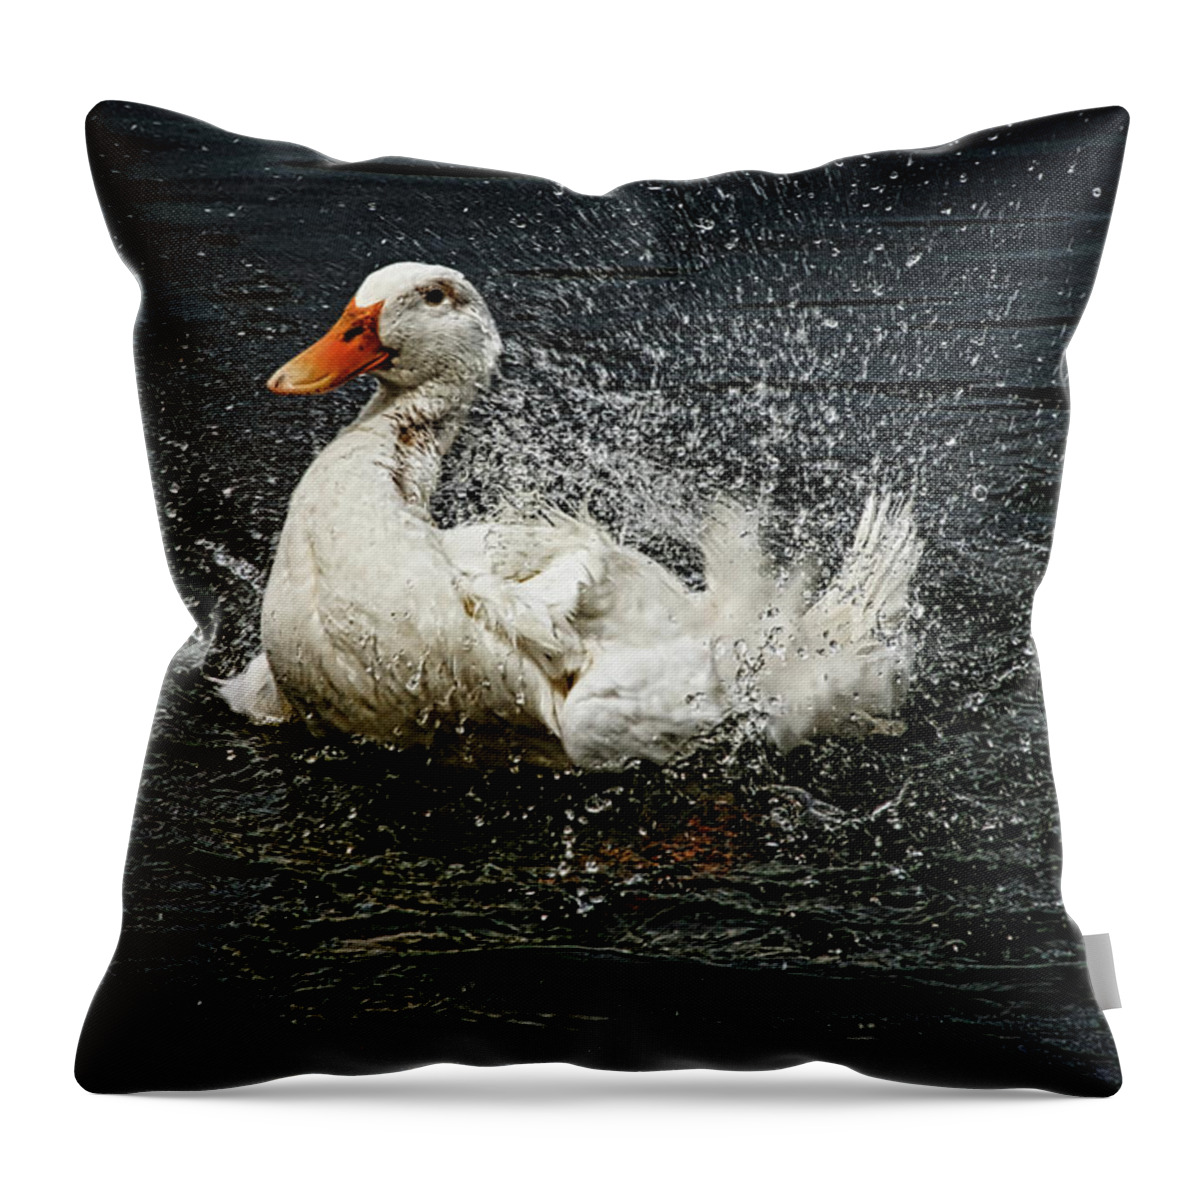 Hdr Photography Throw Pillow featuring the photograph White Pekin Duck by Richard Gregurich